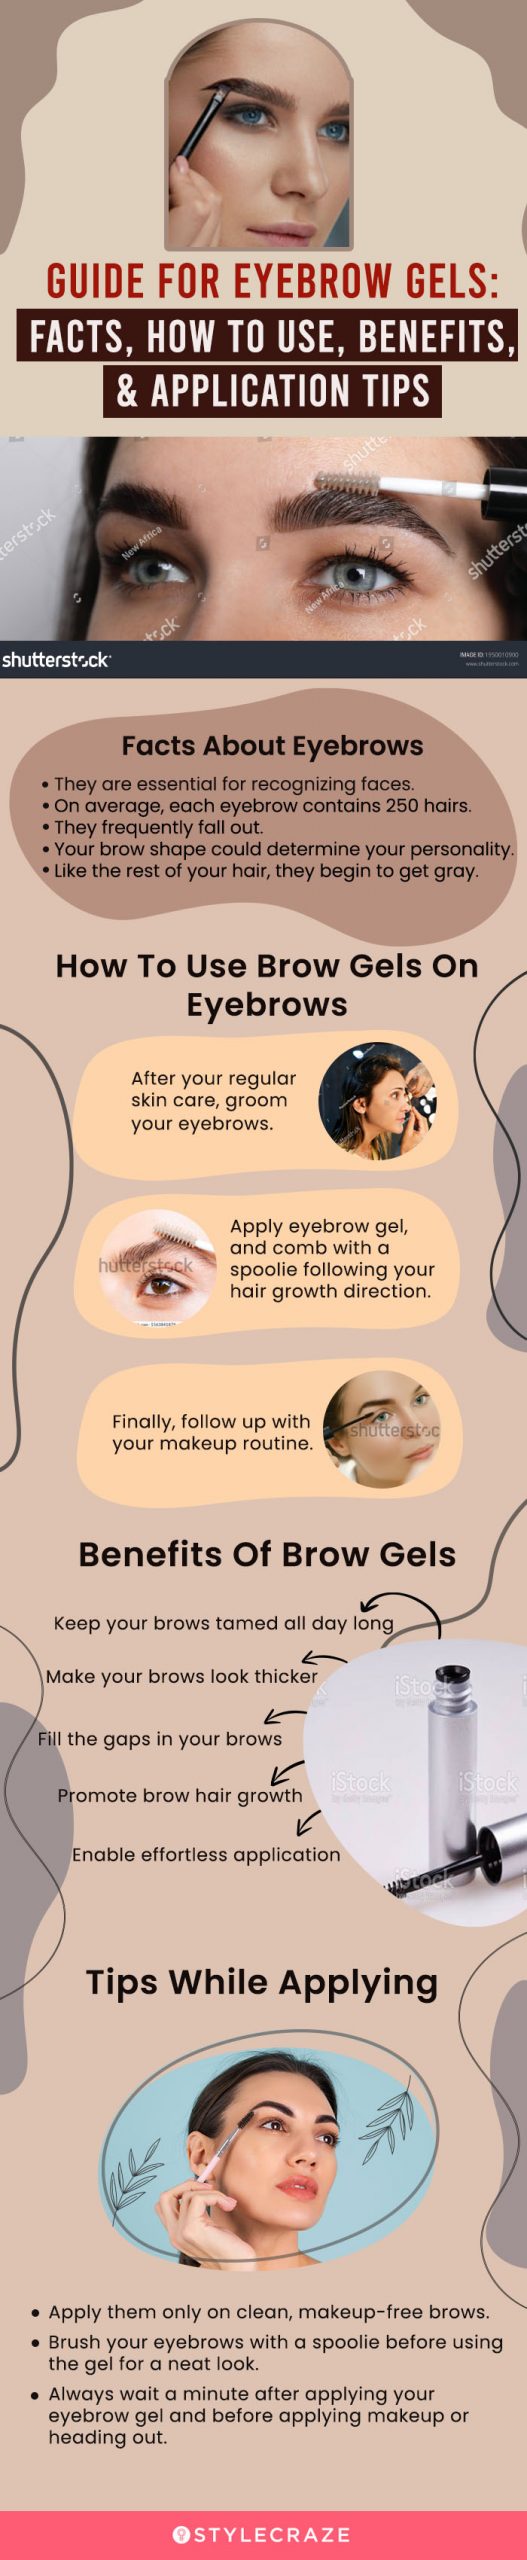 Guide For Eyebrow Gels: How To Use, Application Tips [infographic]